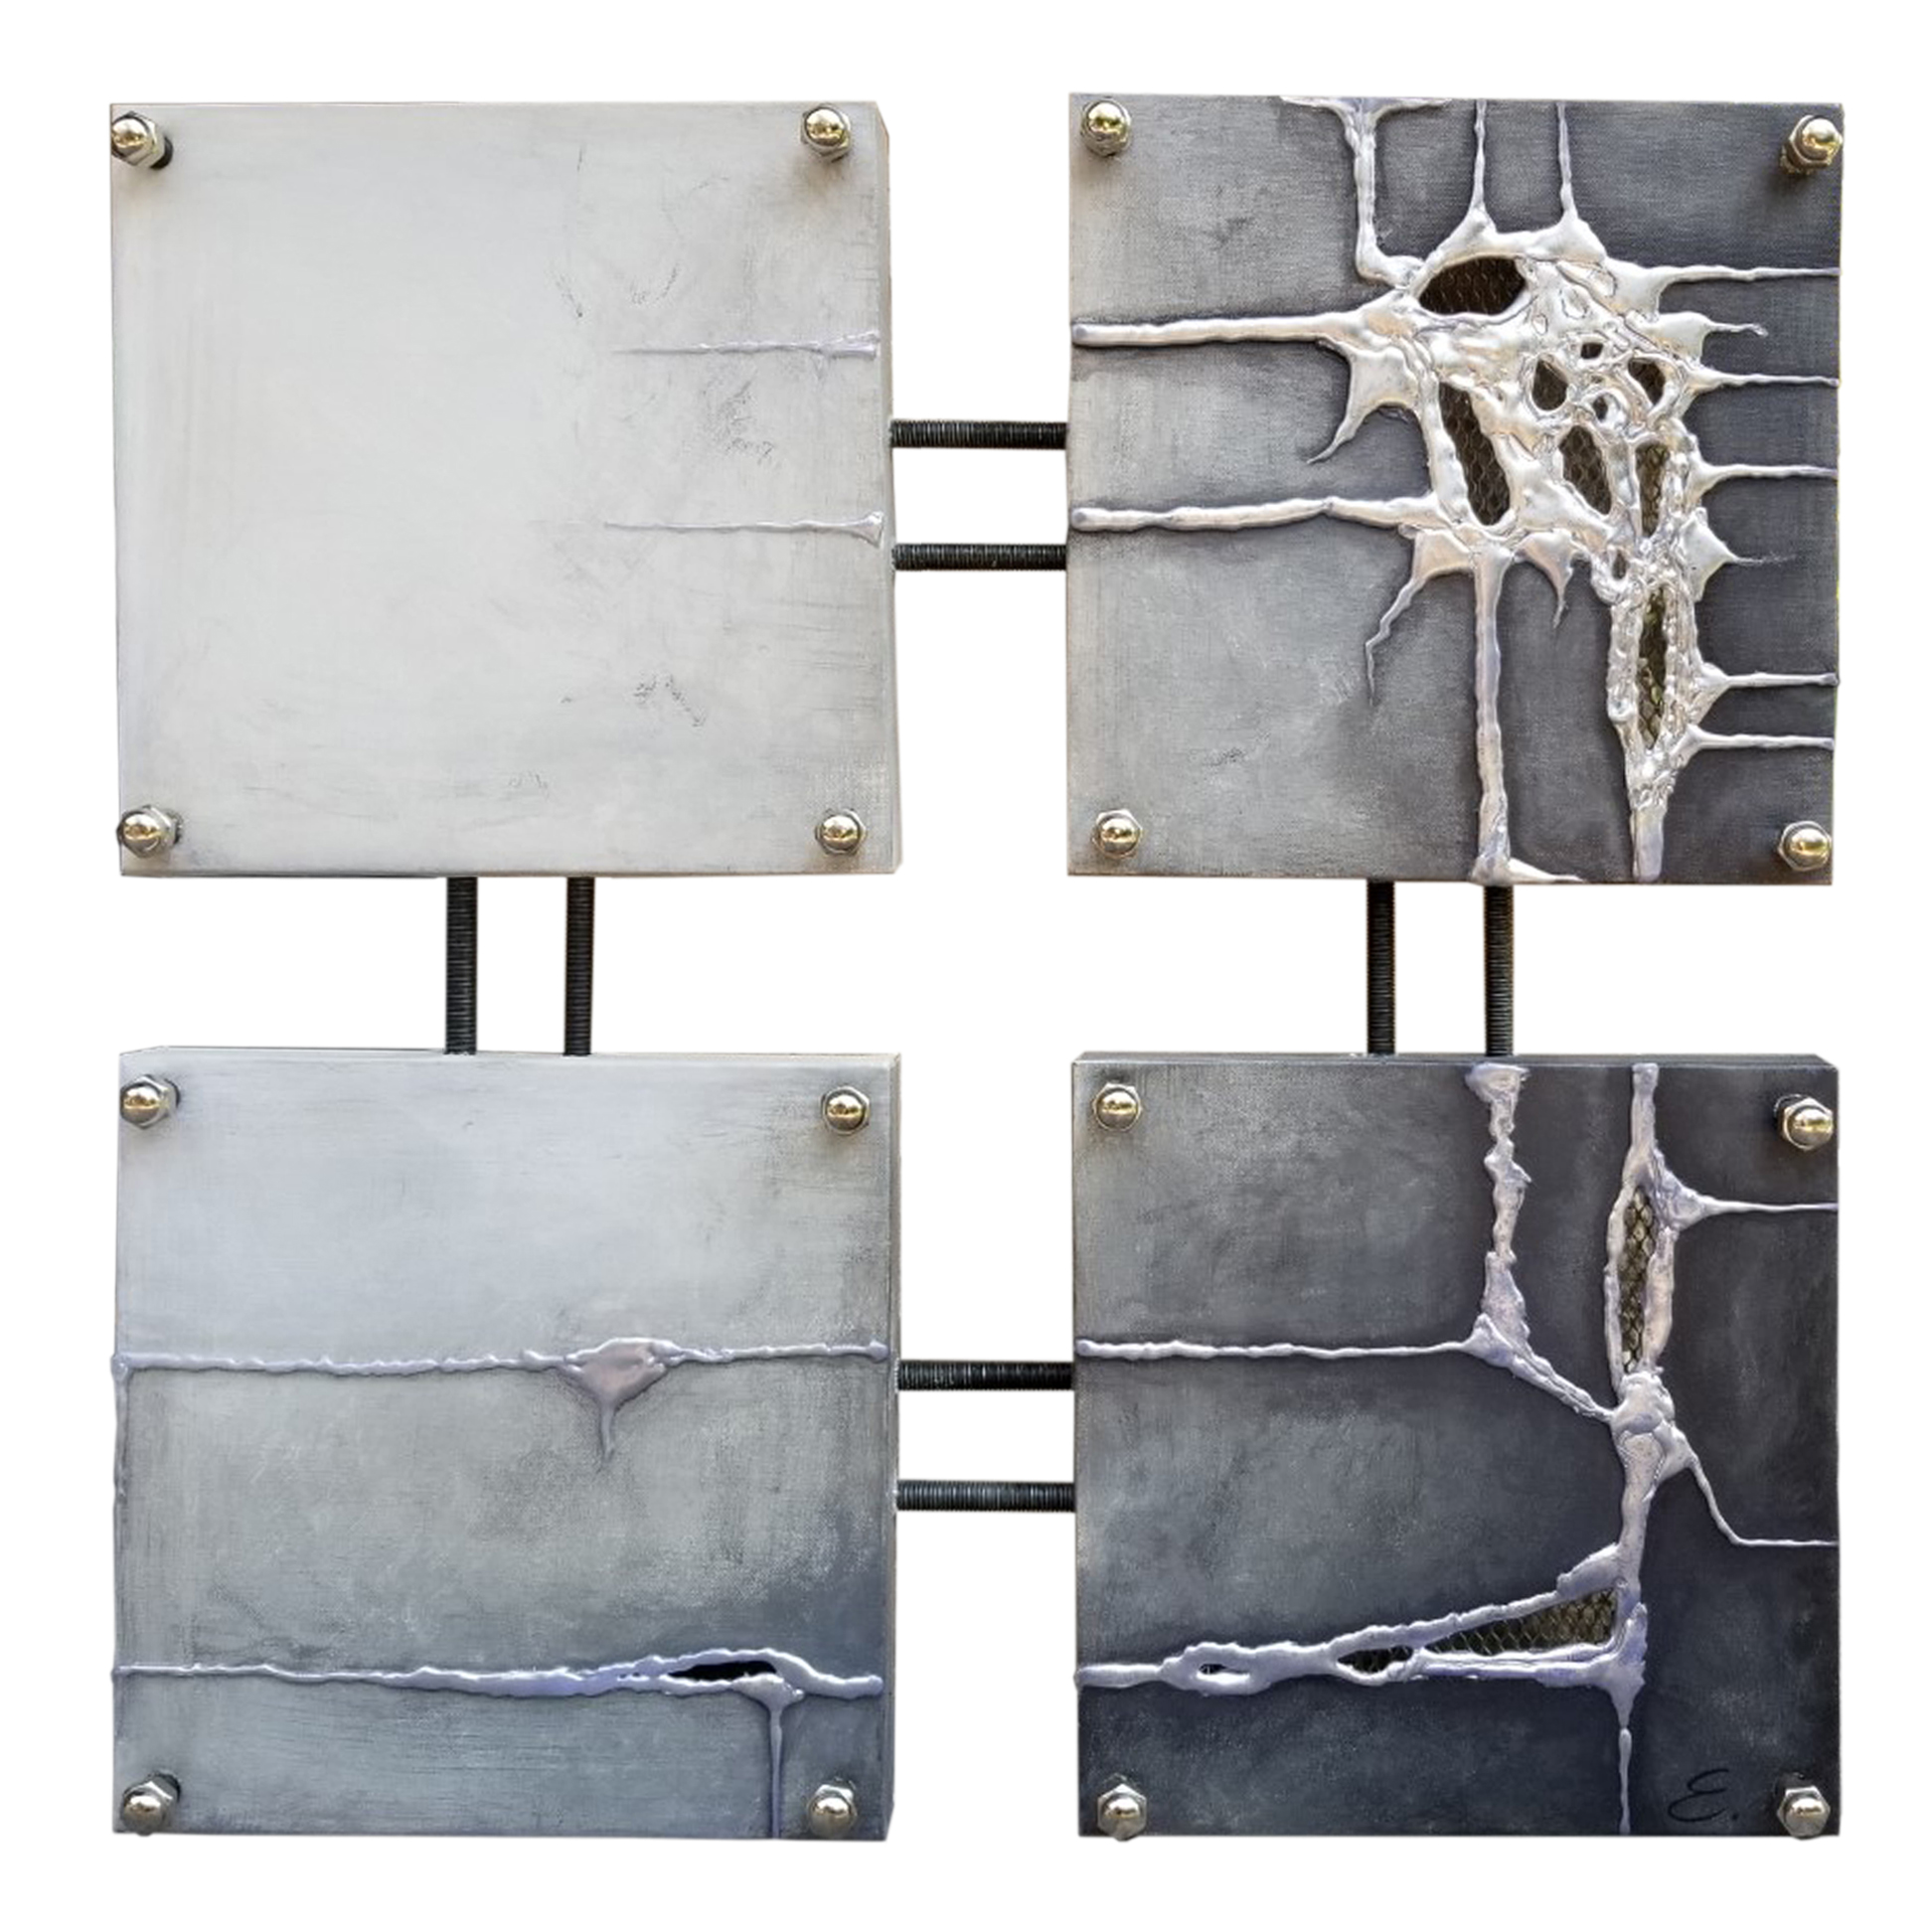 CONNECTION 3 – MIXED MEDIA – 27×27 INCHES